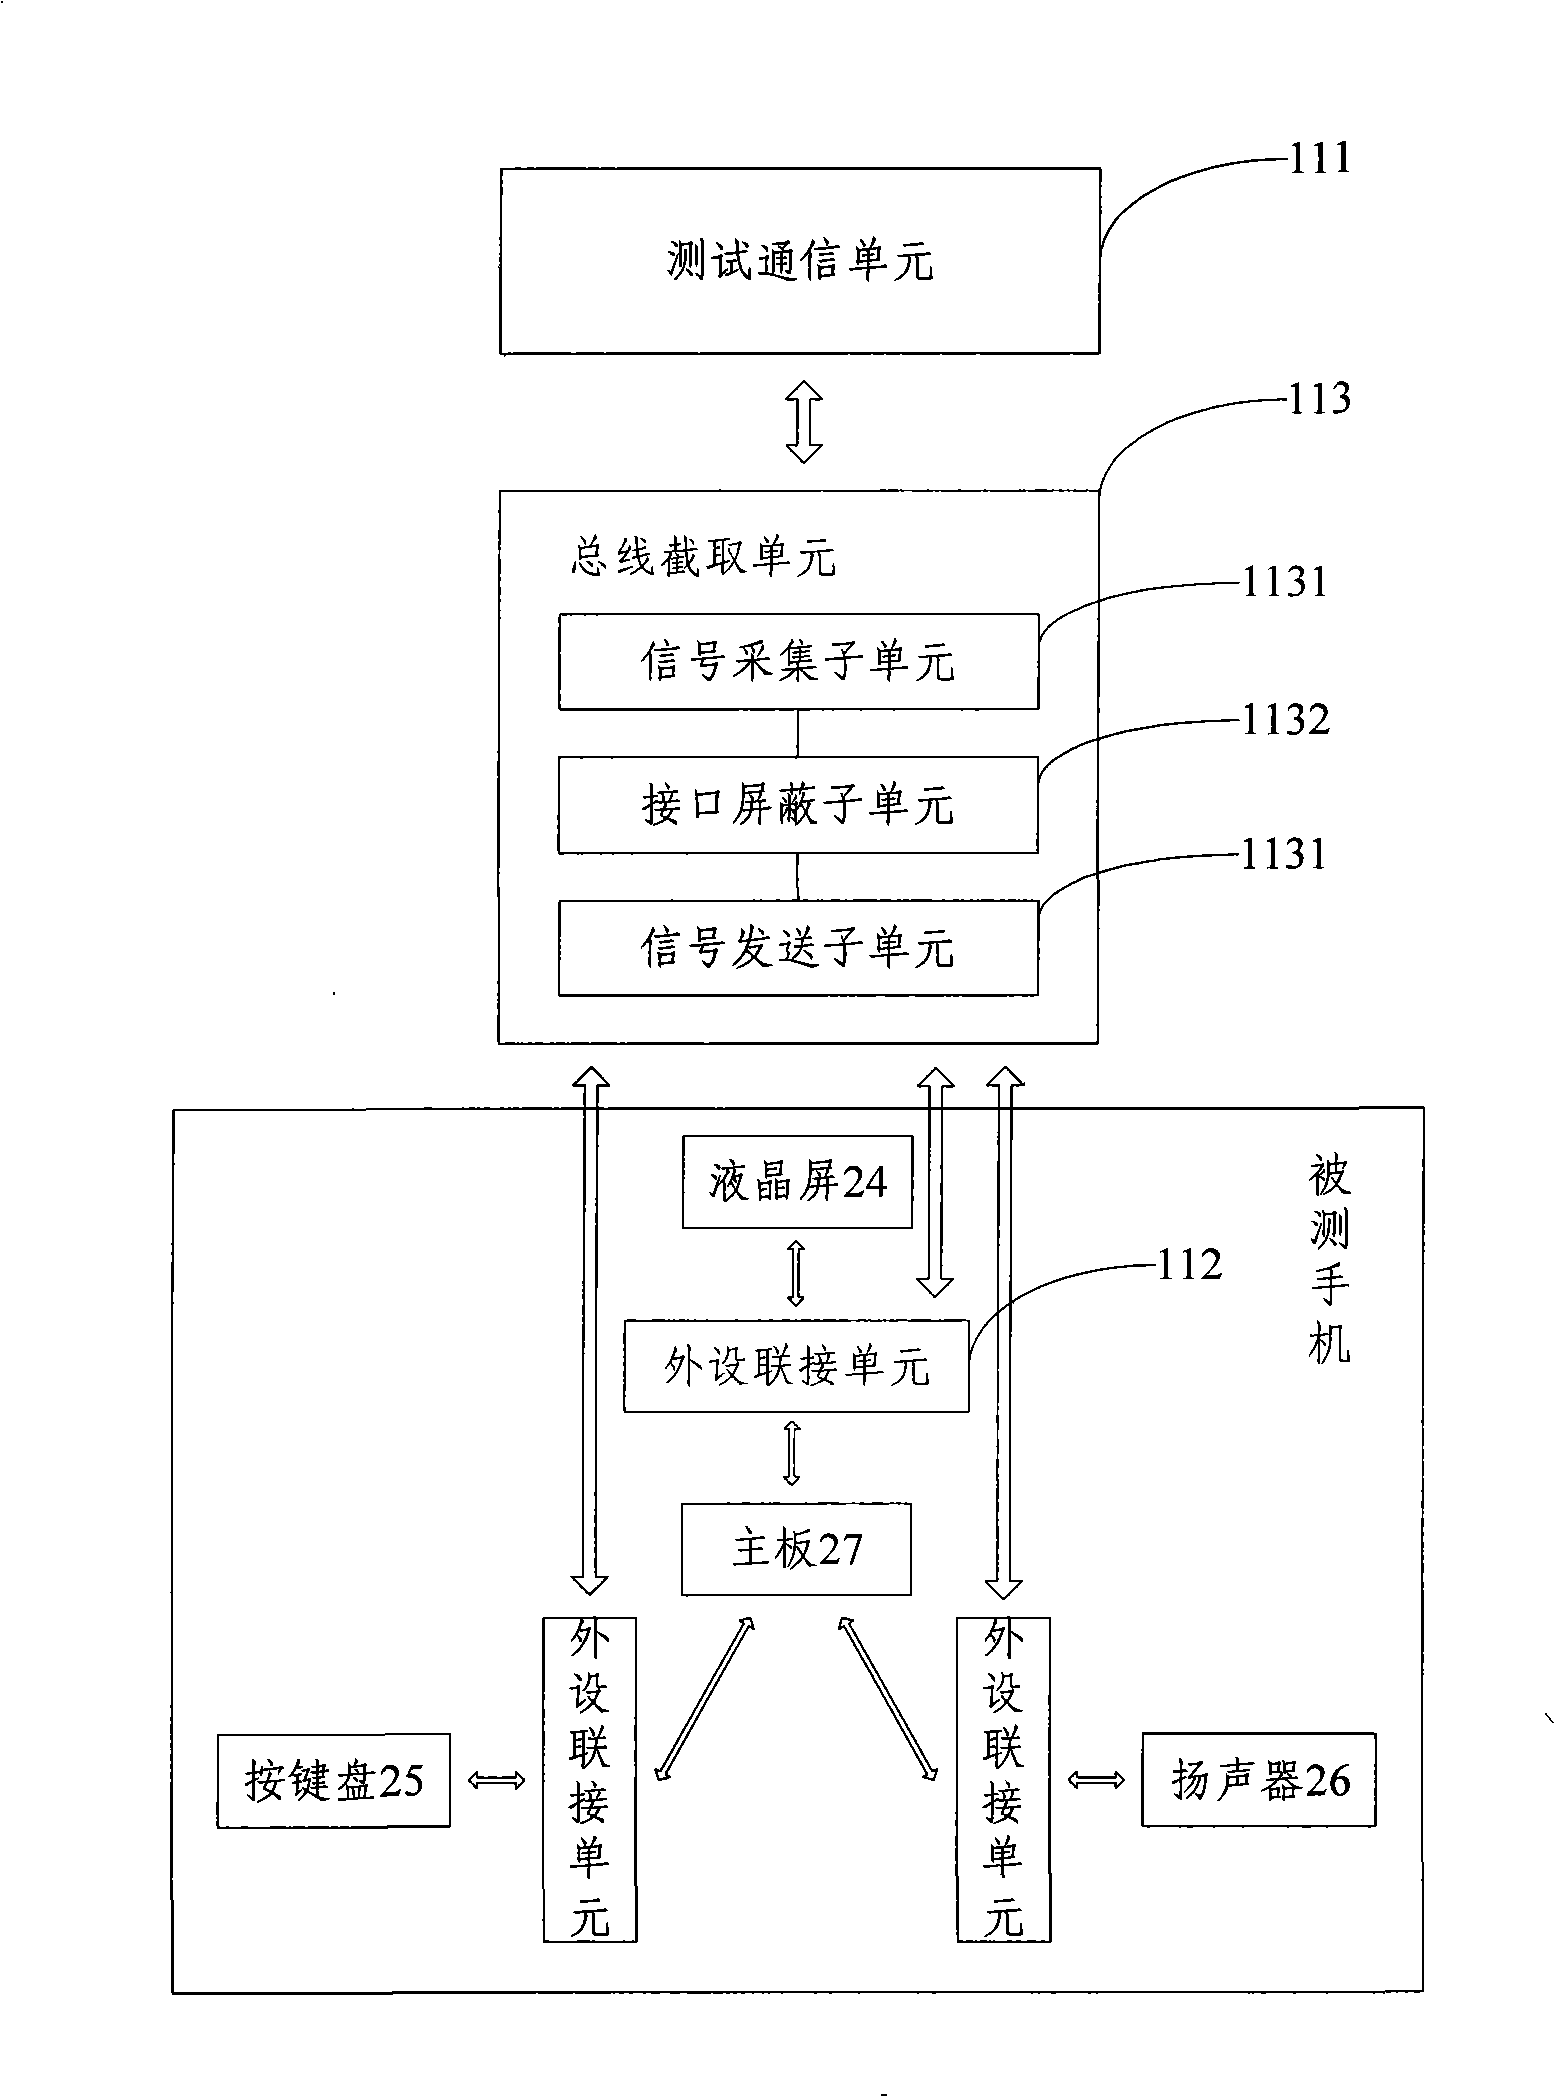 Remote mobile phone test system and method base on bus interception and video acquisition